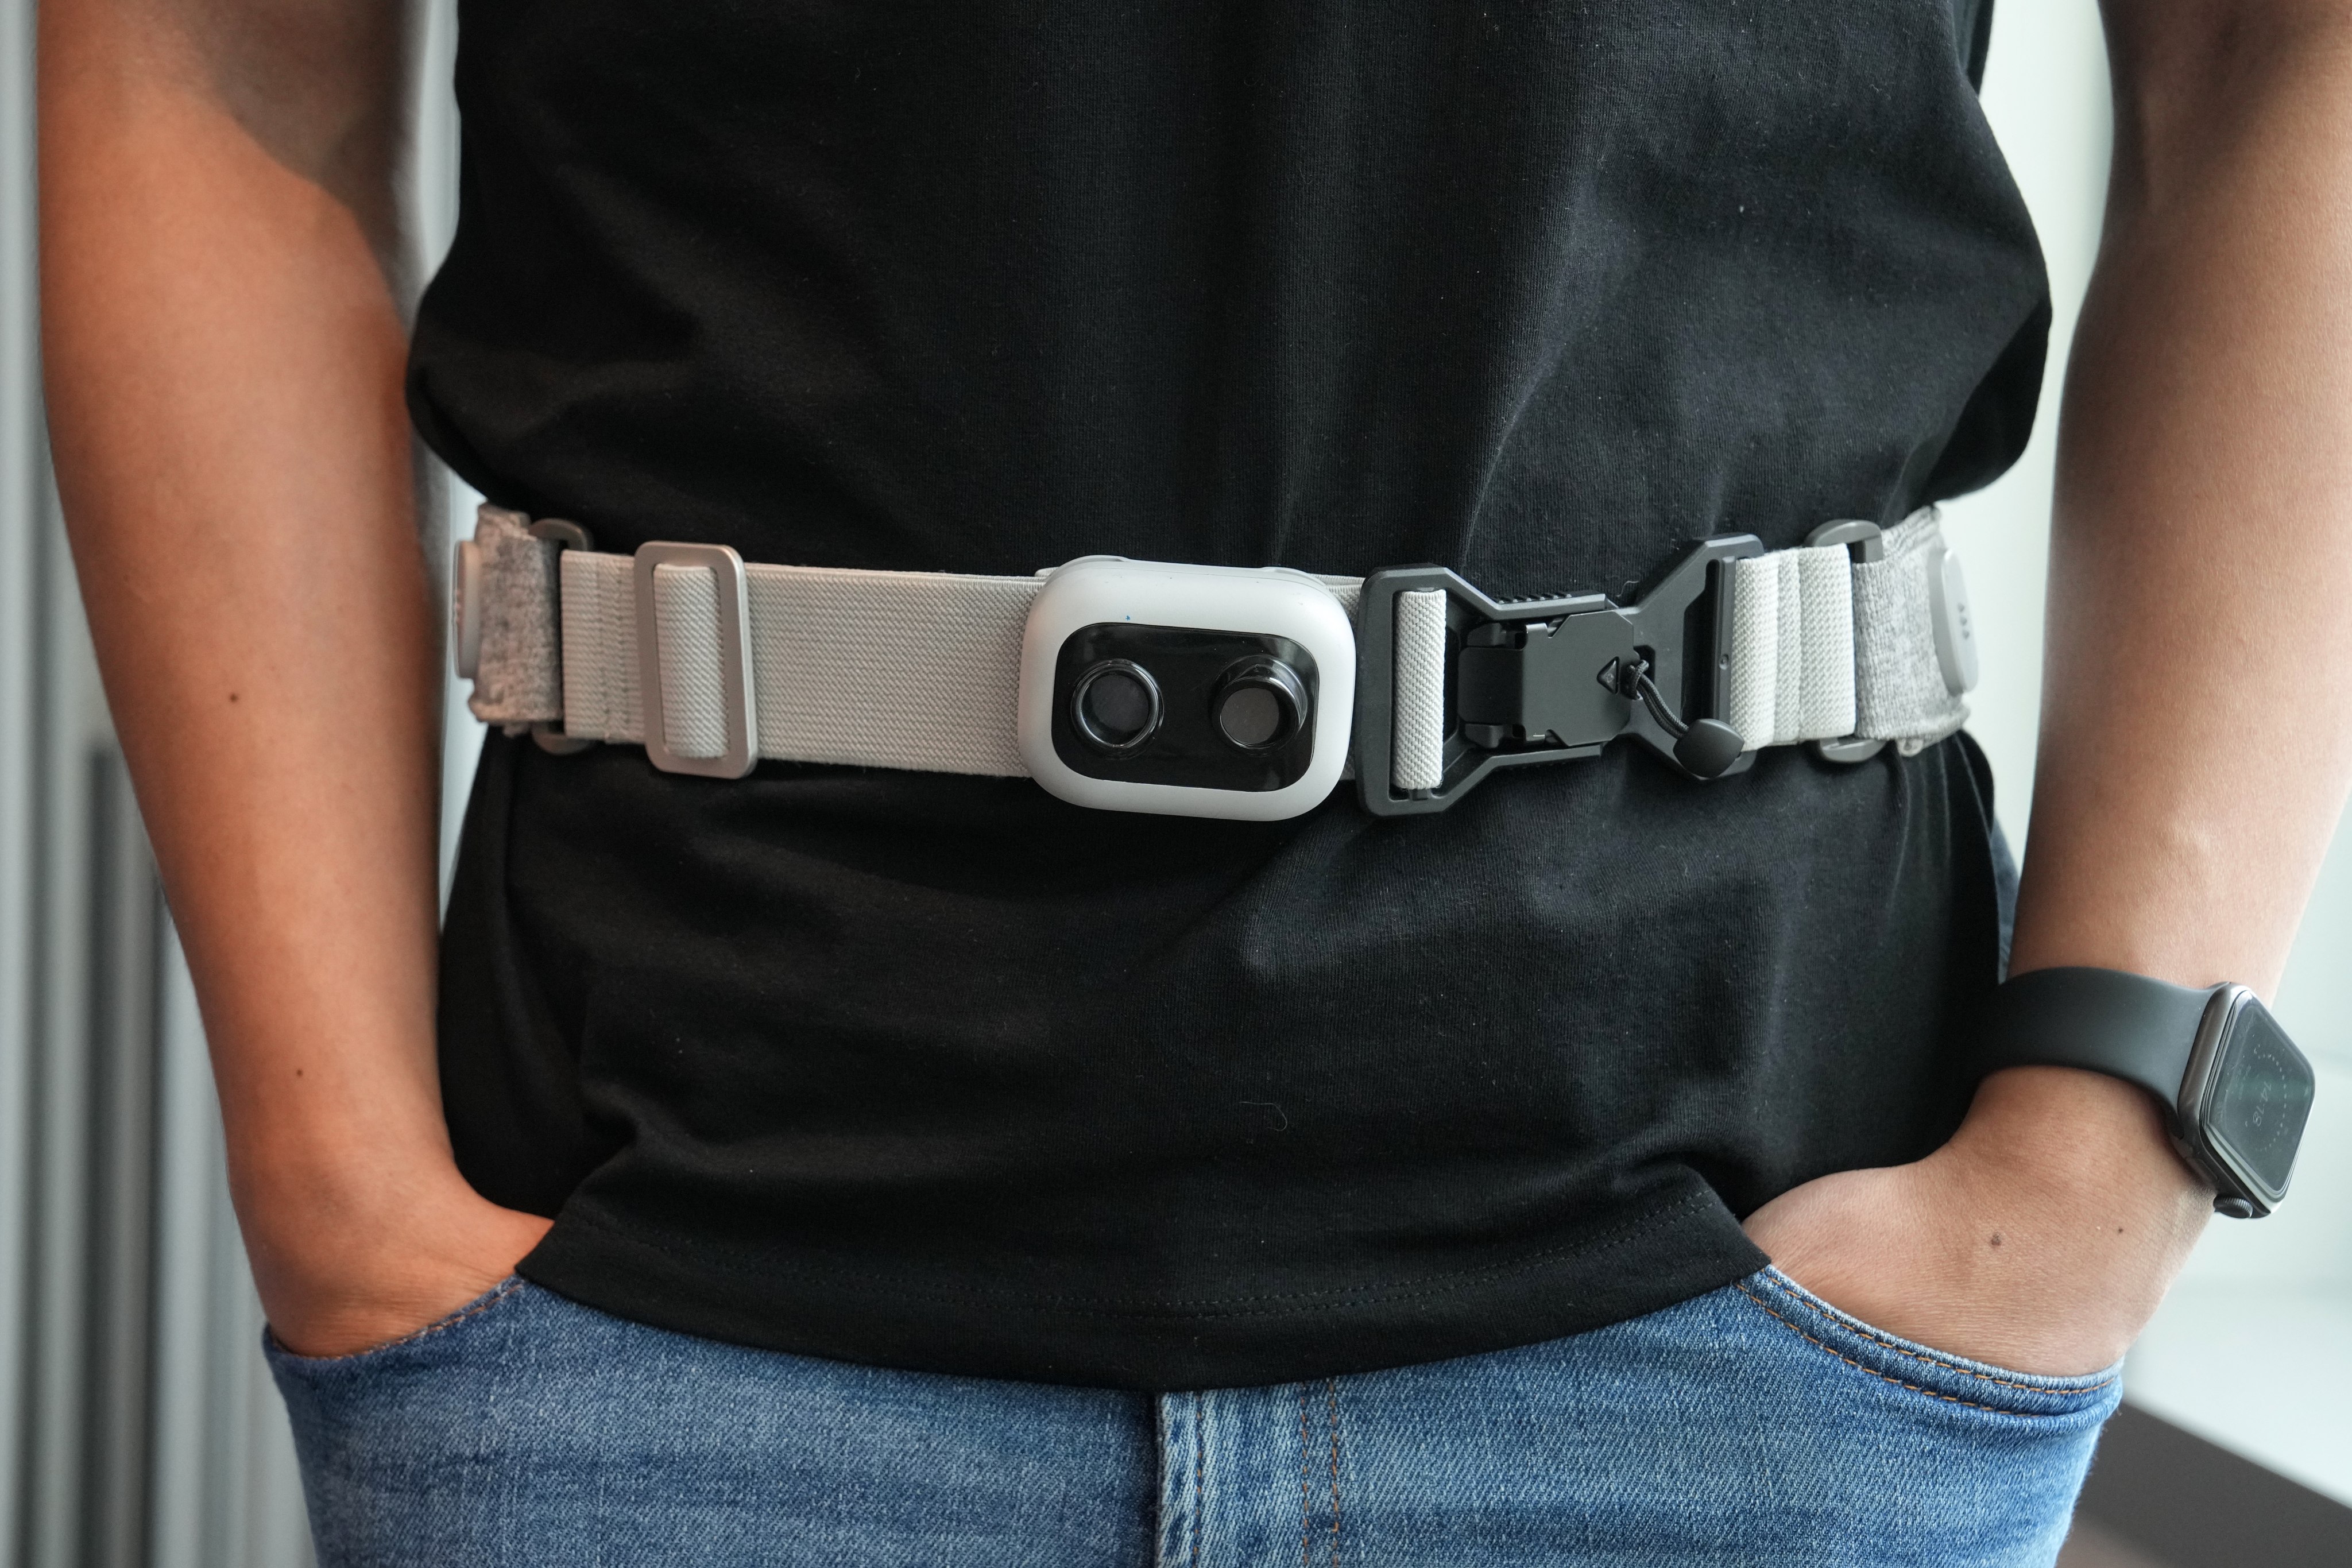 The latest iteration of the product, now in its 10th generation, is a device worn on the waist, mounted with two cameras that use AI algorithms and computer vision. Photo: Elson Li